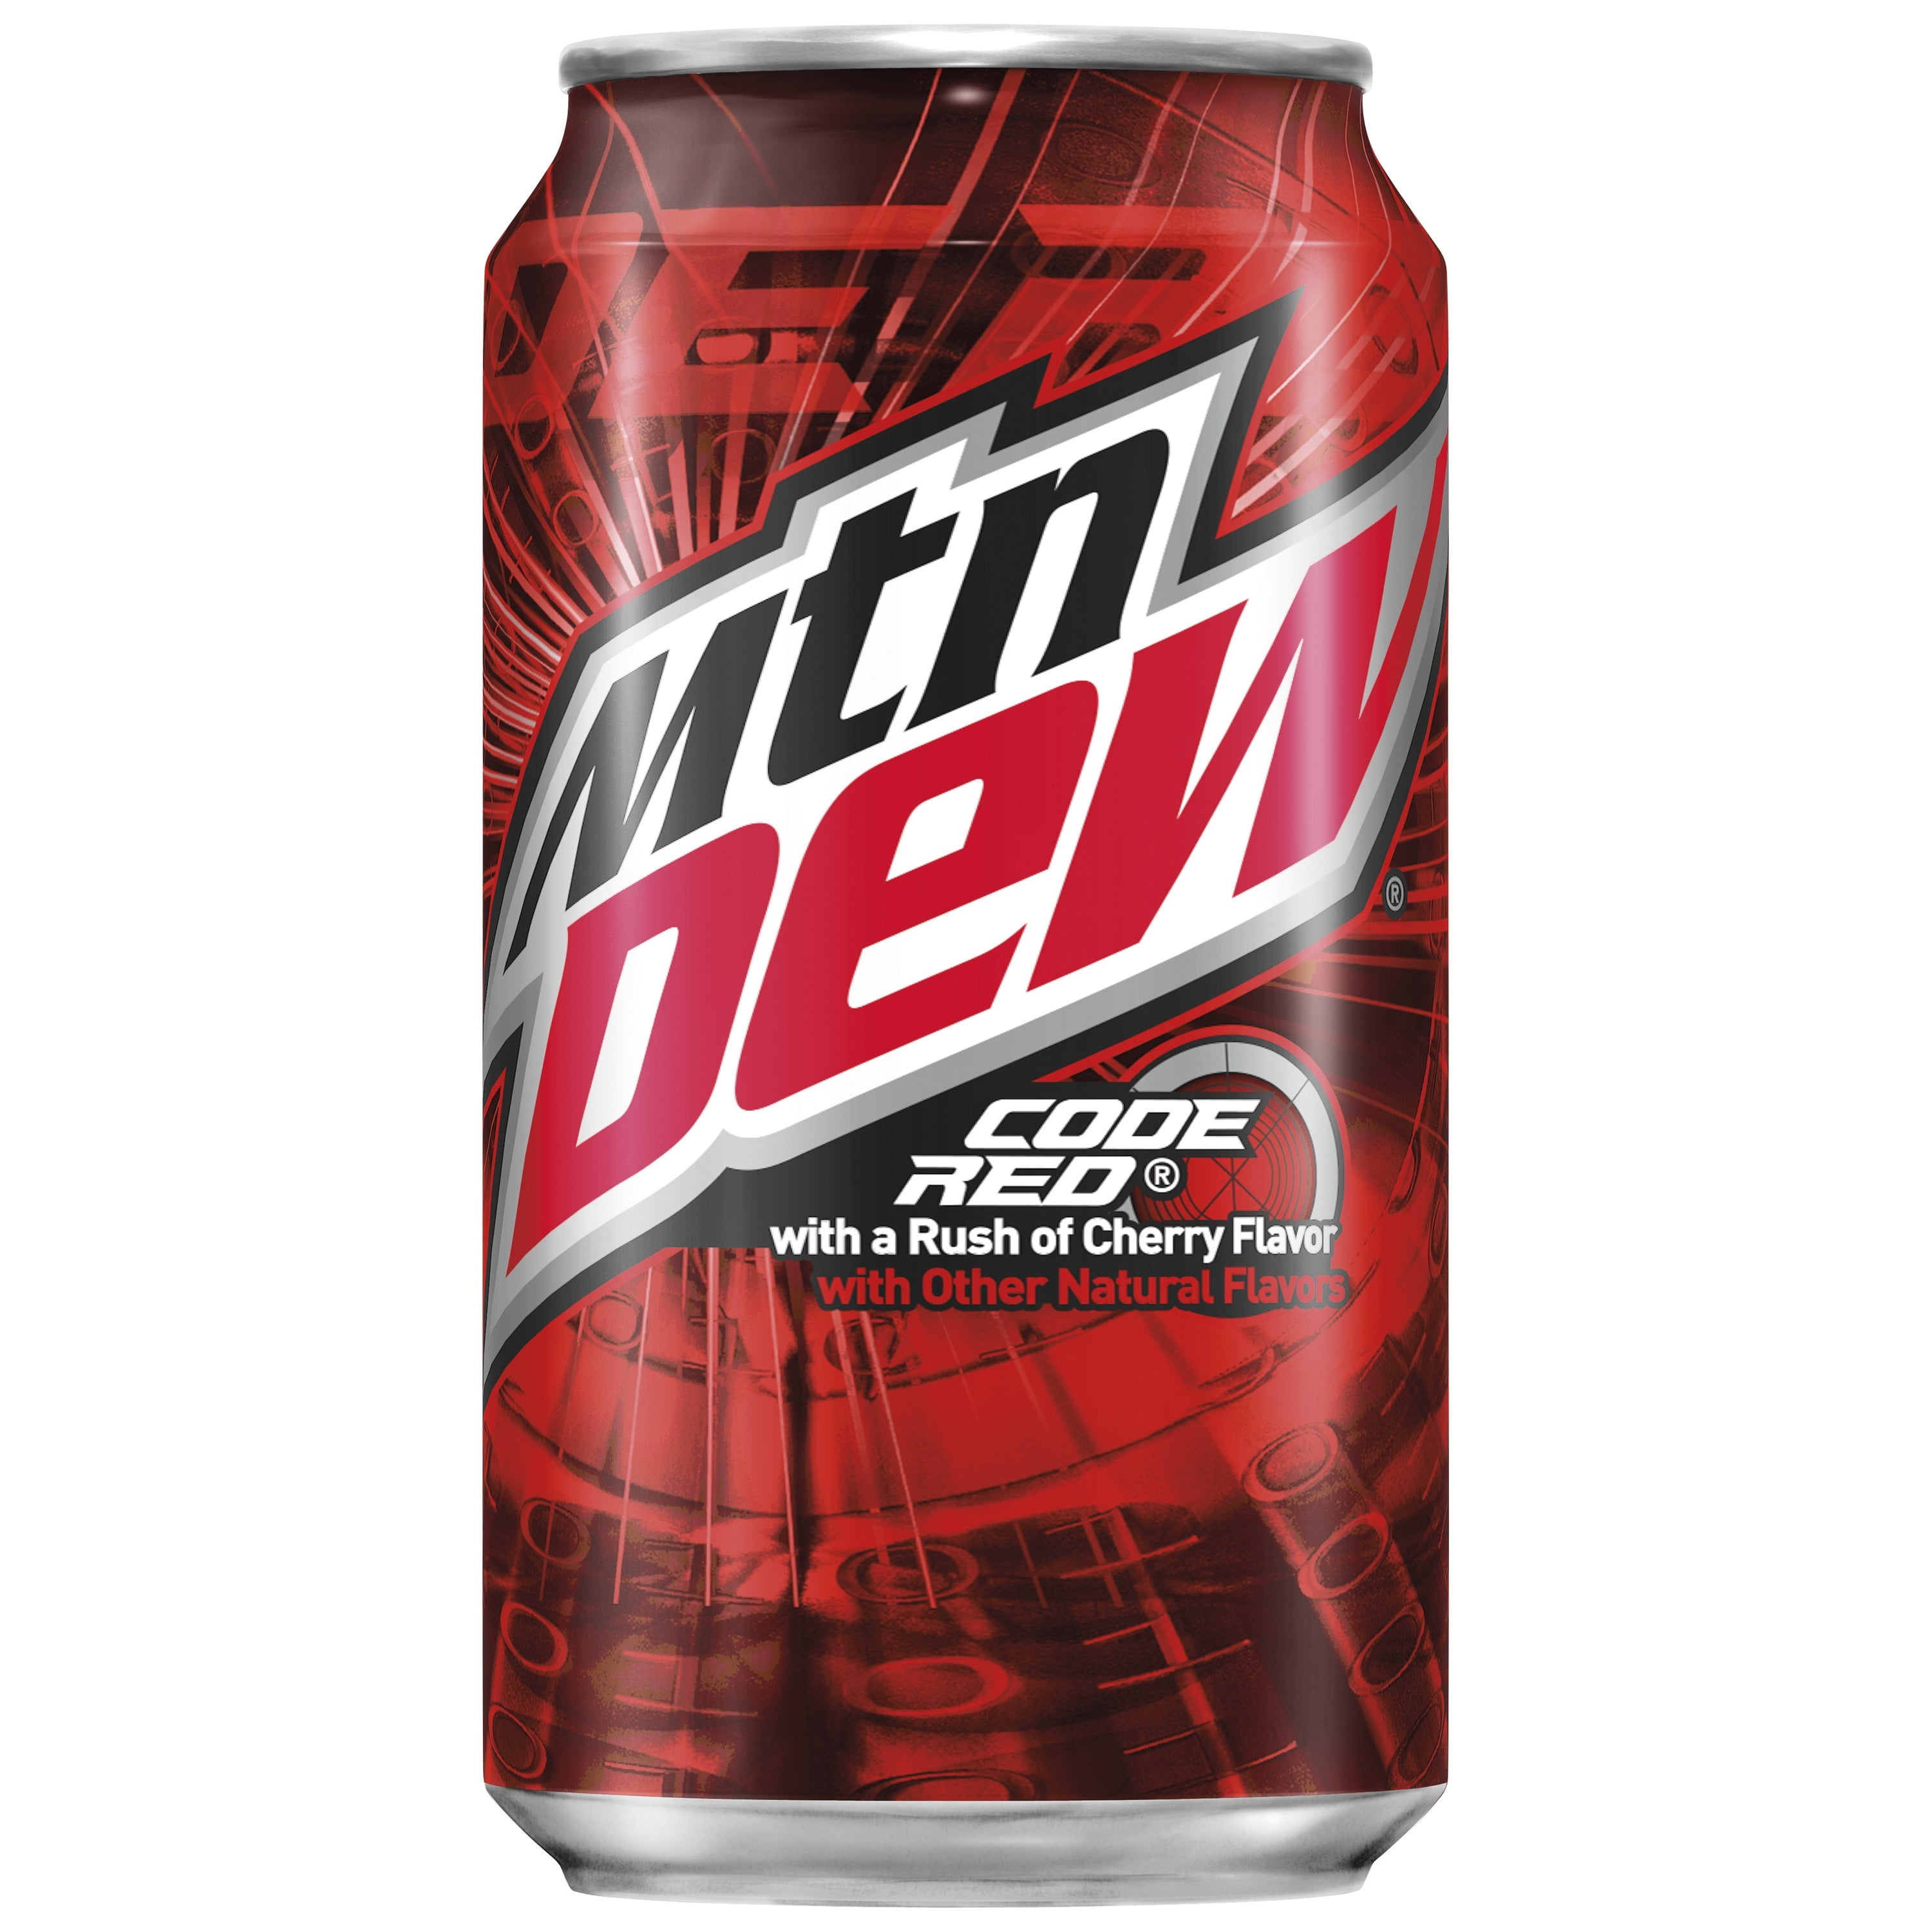 Mountain Dew Code Red 12oz Soda Cans (Pack of Walmart.com